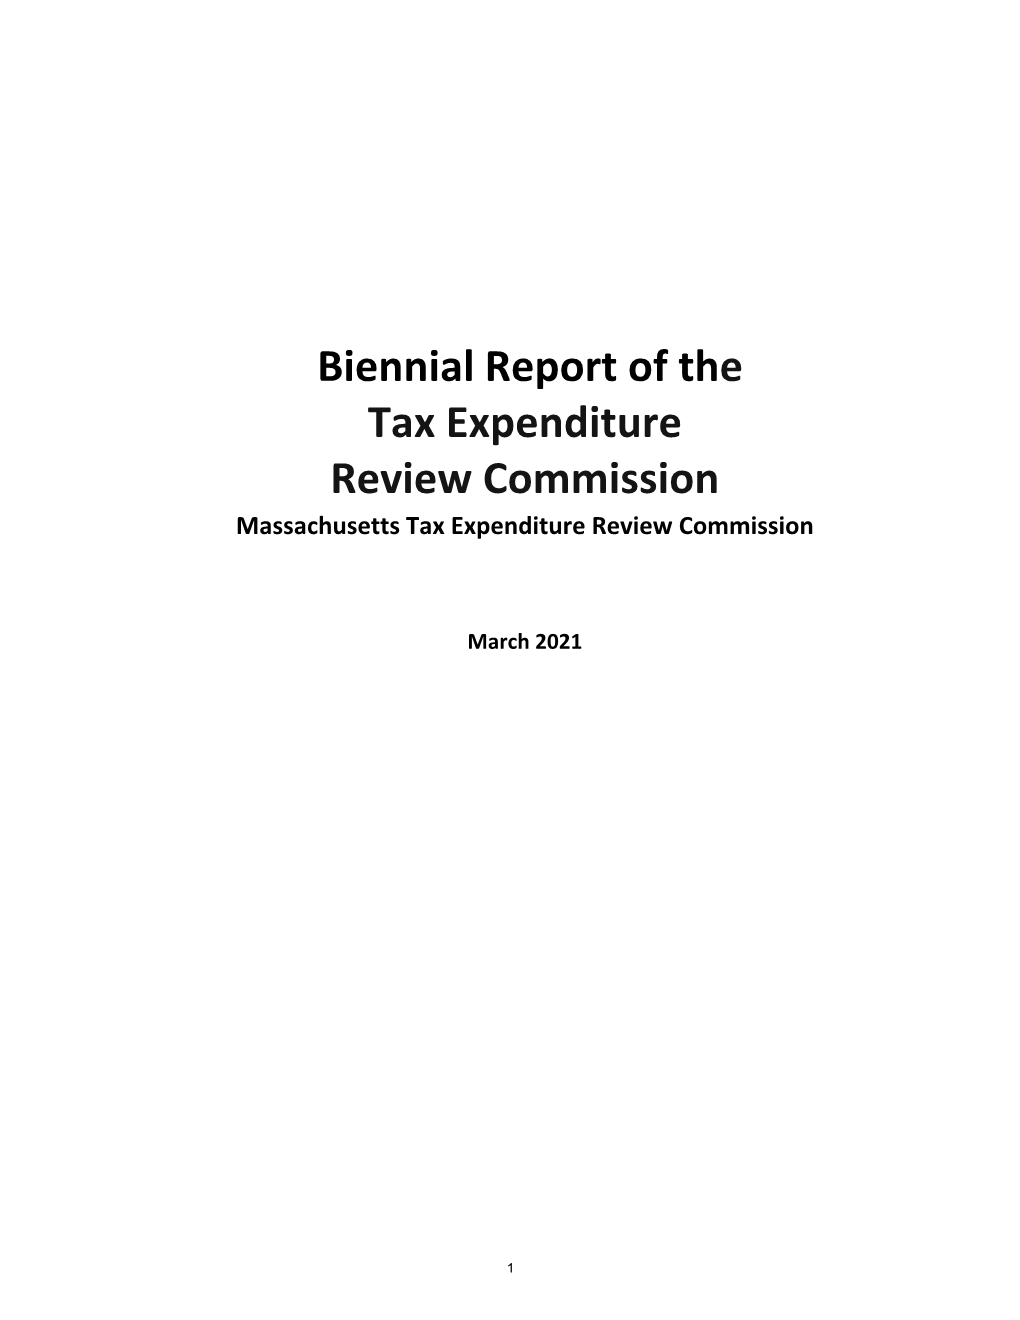 Biennial Report of the Tax Expenditure Review Commission Massachusetts Tax Expenditure Review Commission